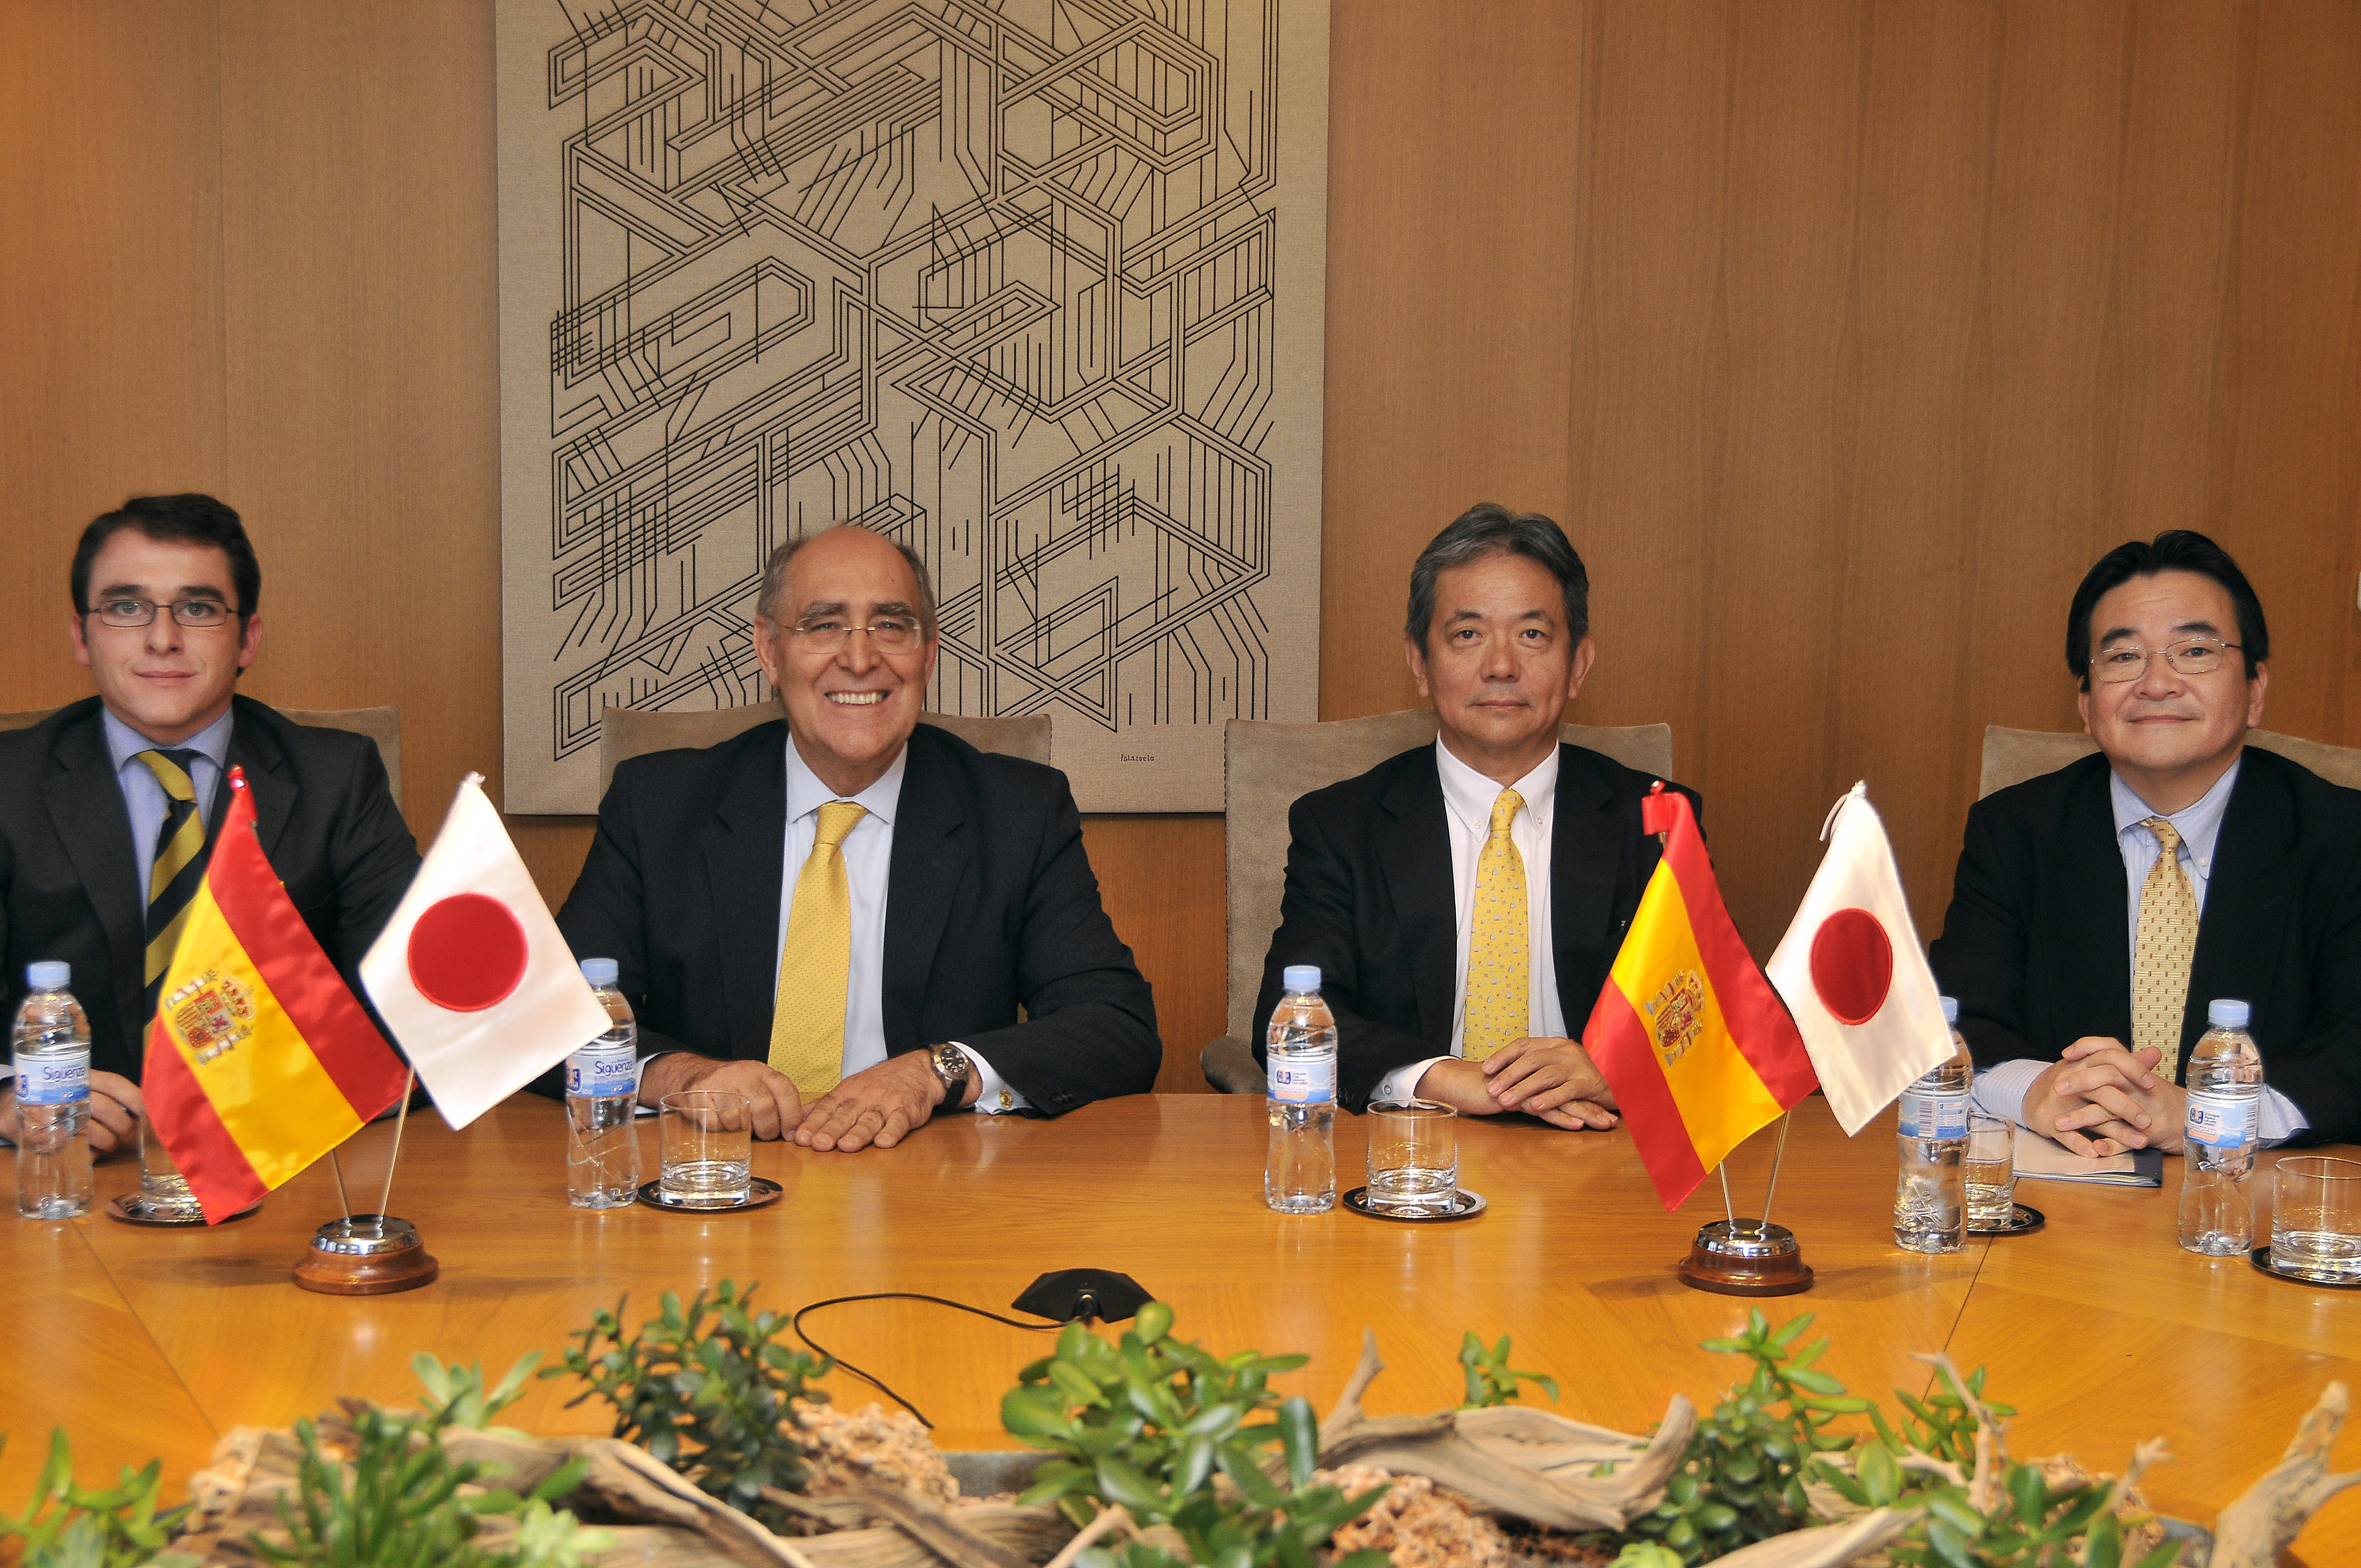 FCC and MITSUI partner to develop solar thermal power in Spain